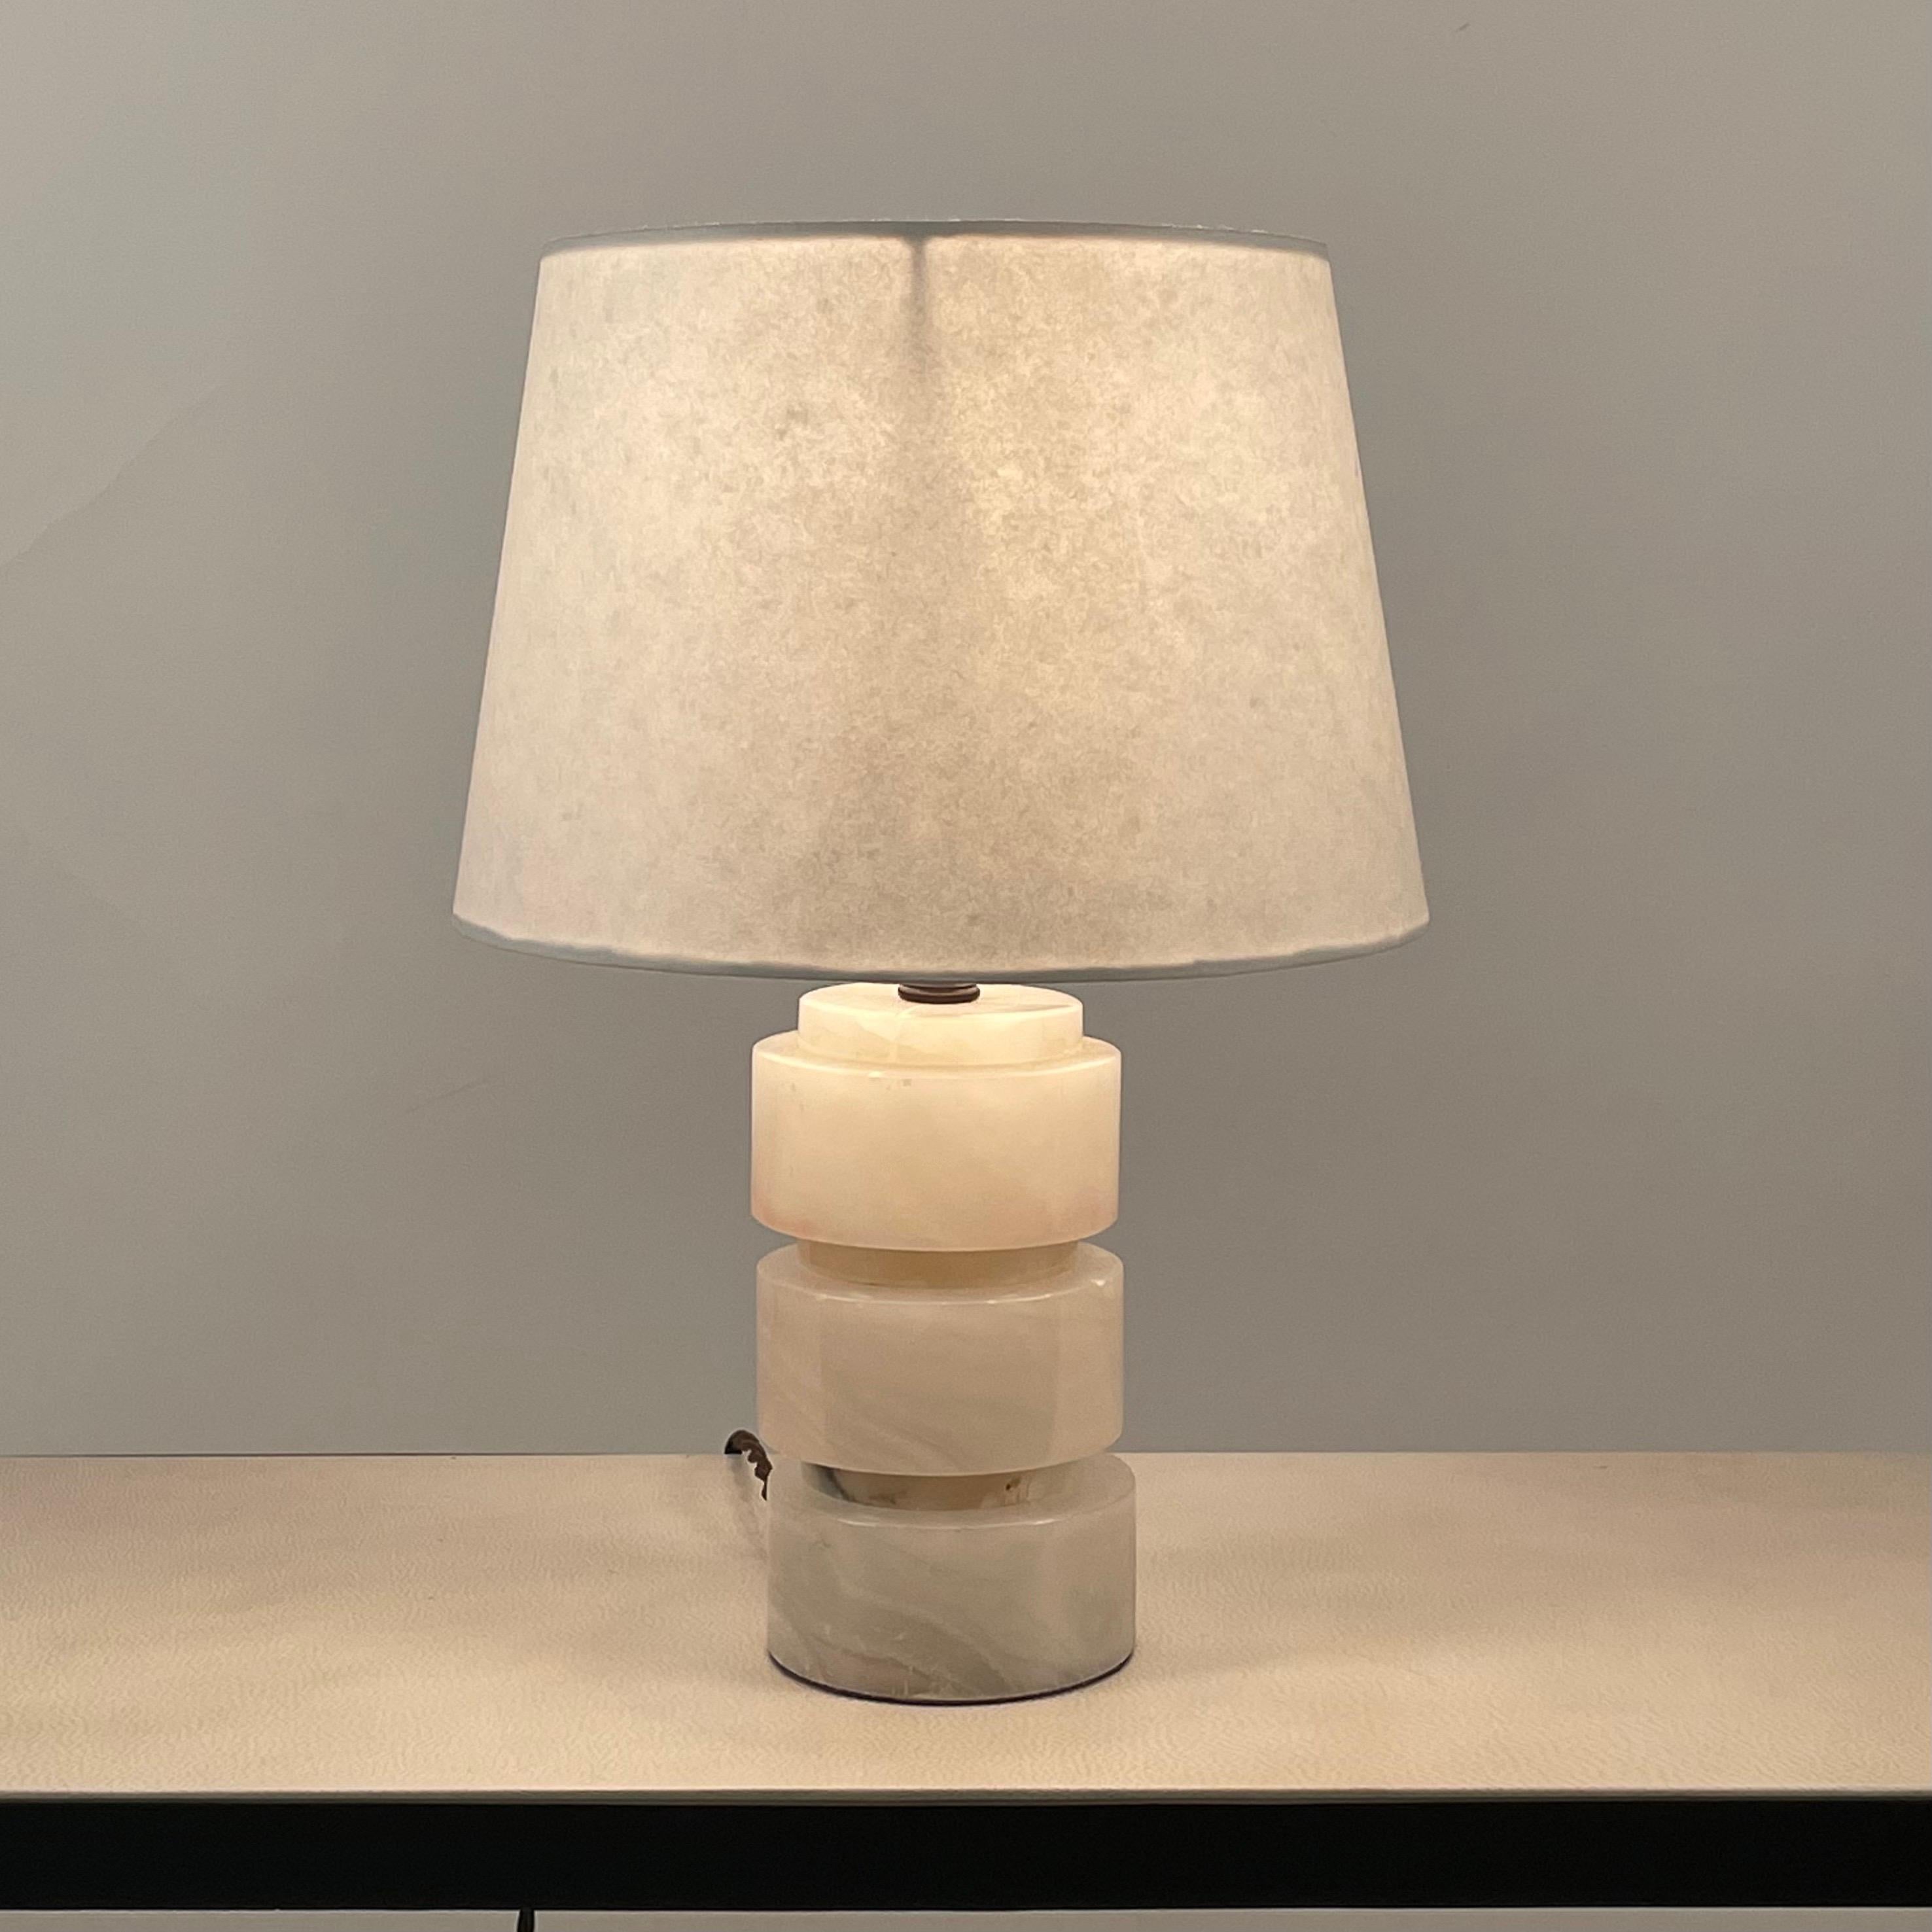 Chic polished alabaster Art Deco table lamp. Rewired with new parchment paper shade.

Perfect where a smaller, understated lamp is desired.

Dimensions listed are the overall dimensions of the lamp with the shade in place.